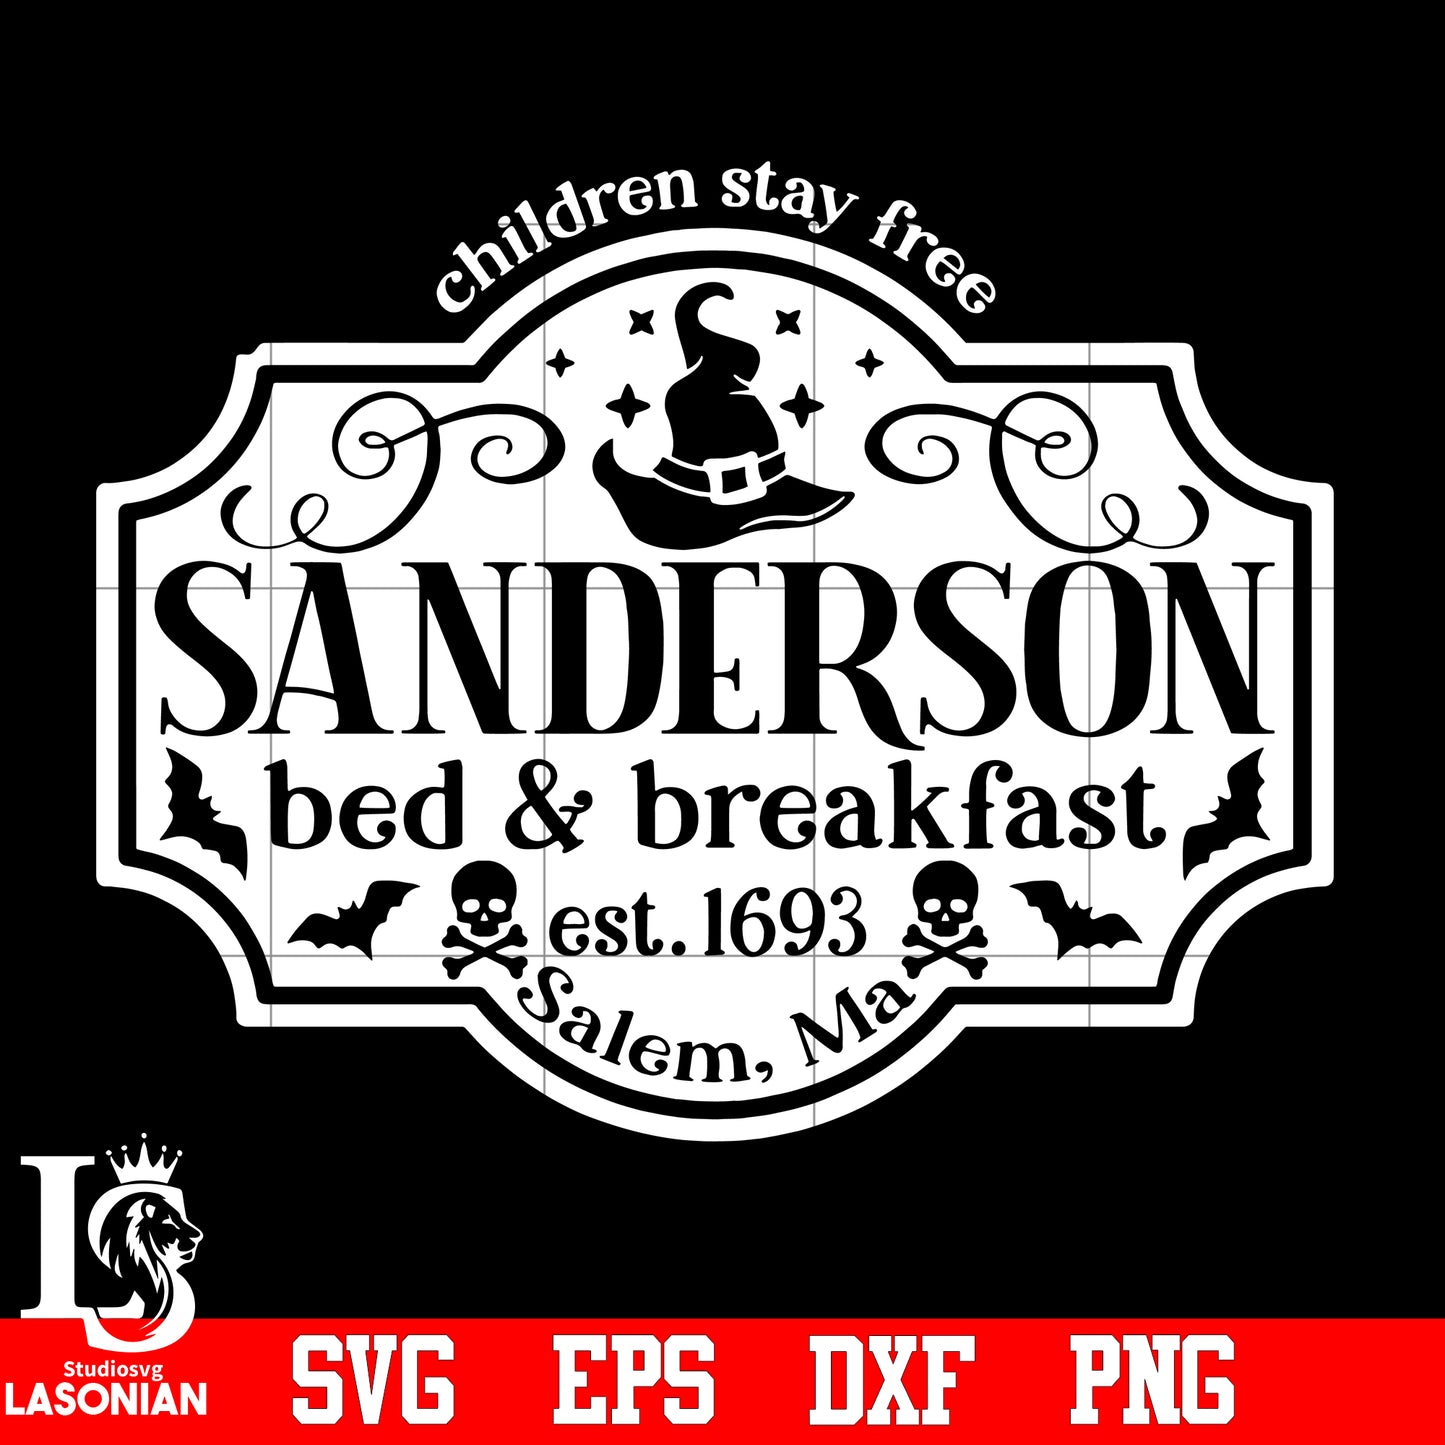 Sanderson Bed and Breakfast Sign, Sanderson Sisters svg,eps,dxf,png file